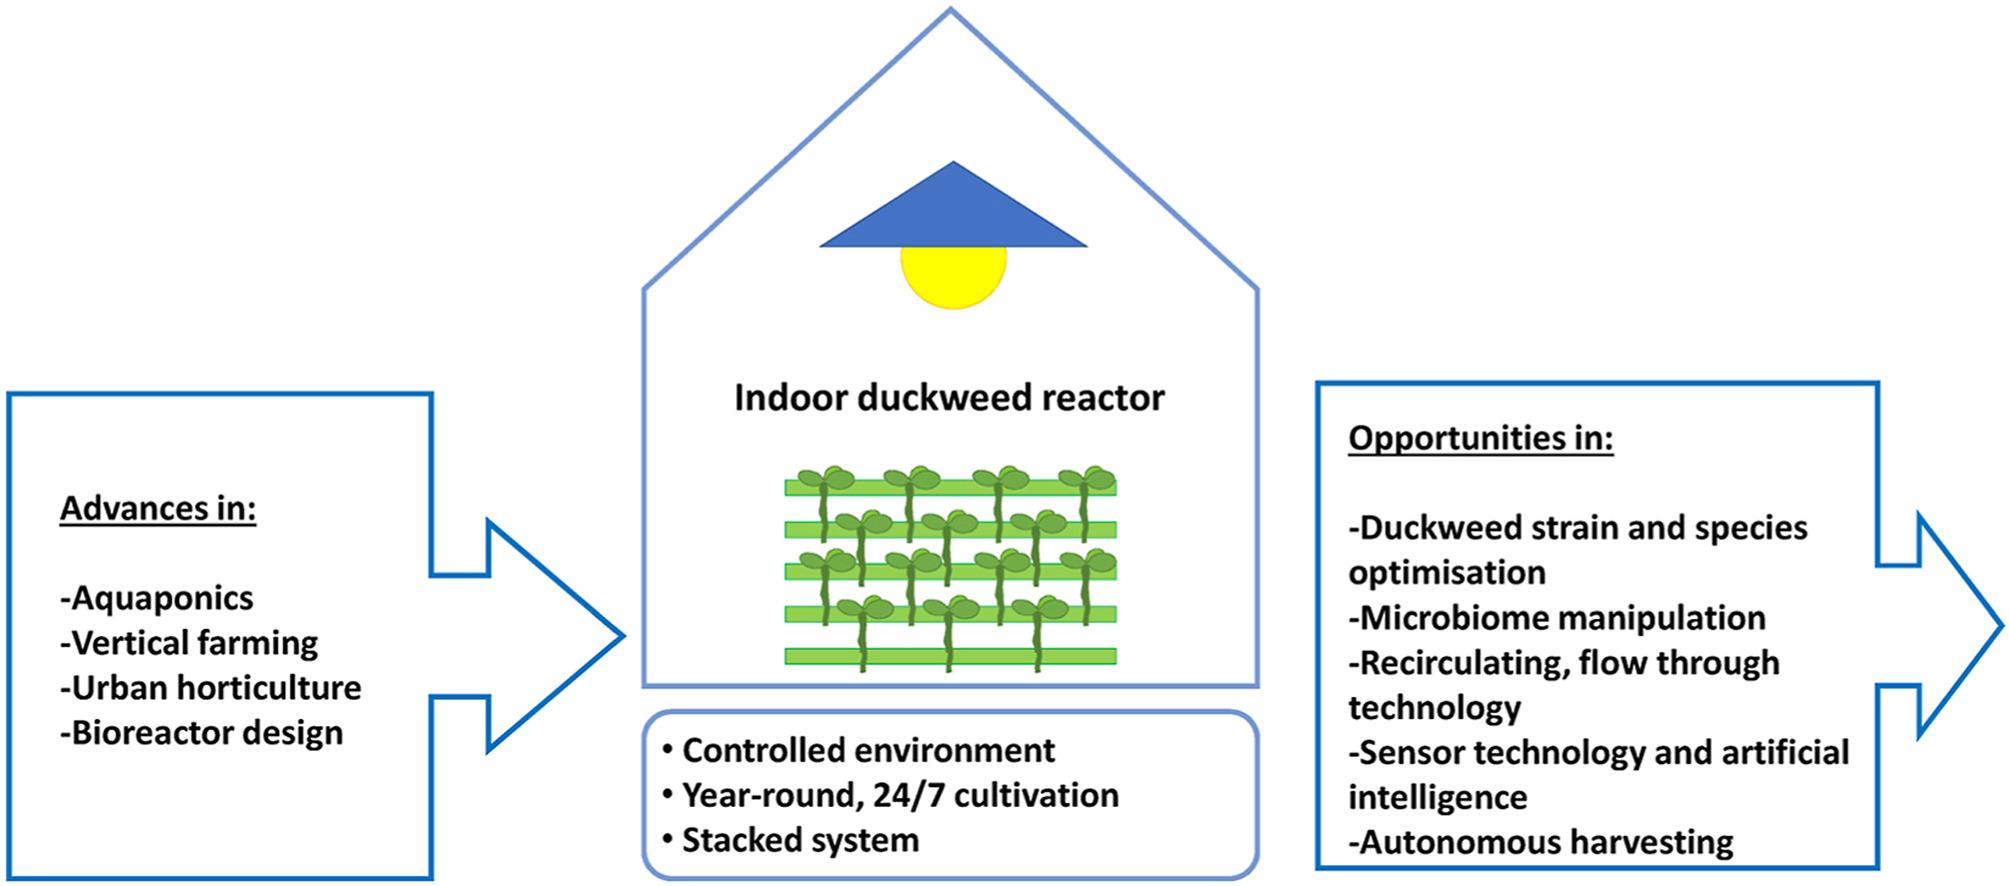 Research identifies 6 steps to advance innovative indoor duckweed cultivation